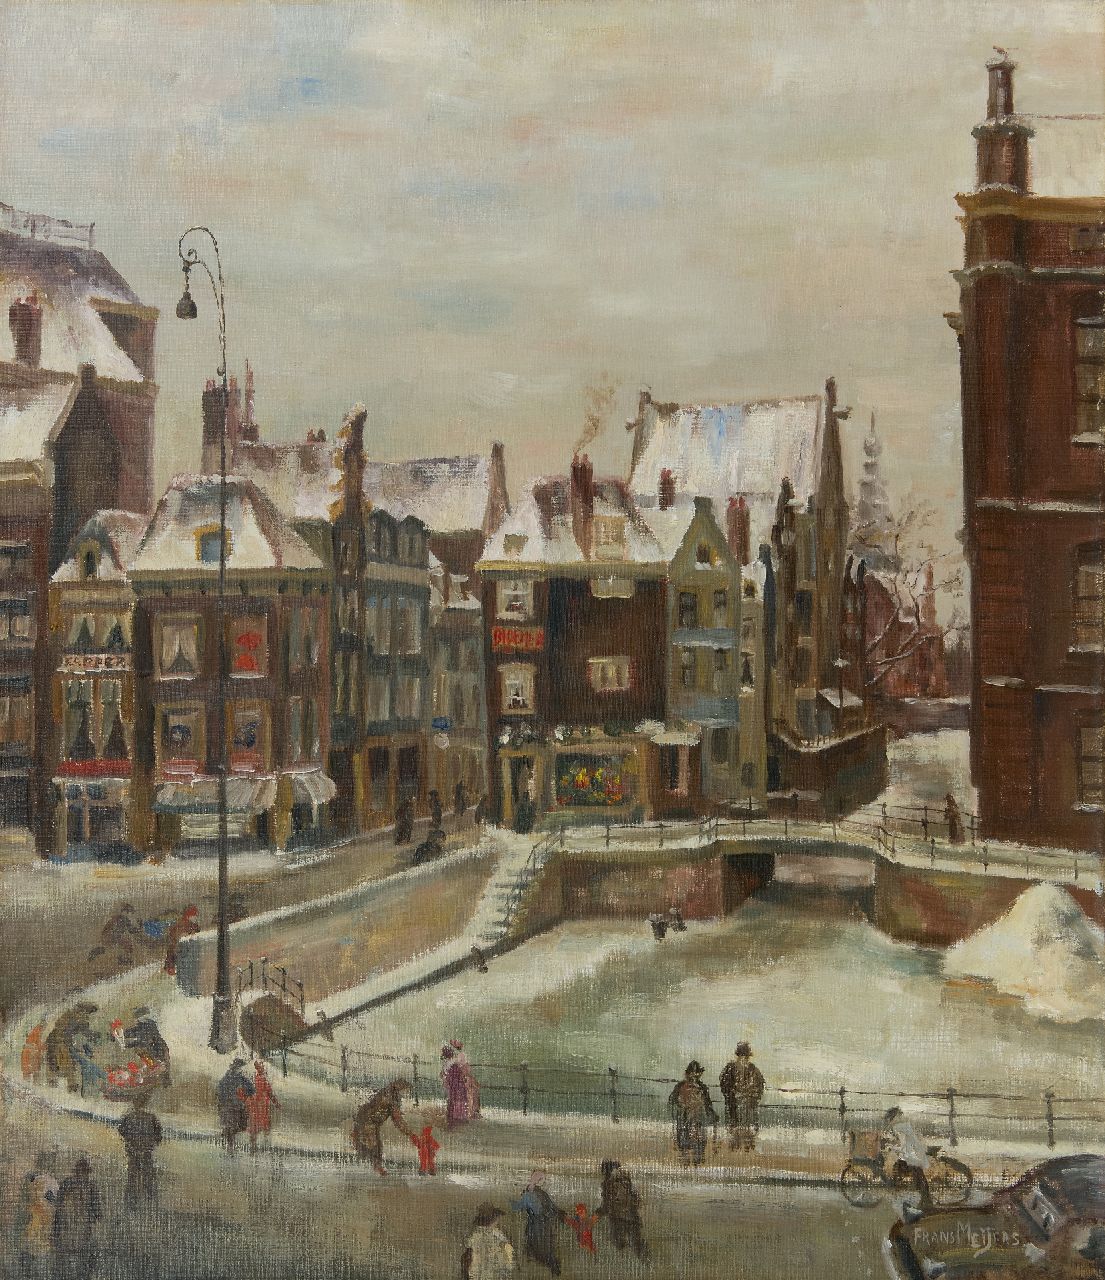 Frans Meijers | A view of  the Rokin in Amsterdam from the Arti building, oil on canvas, 70.1 x 60.1 cm, signed l.r.